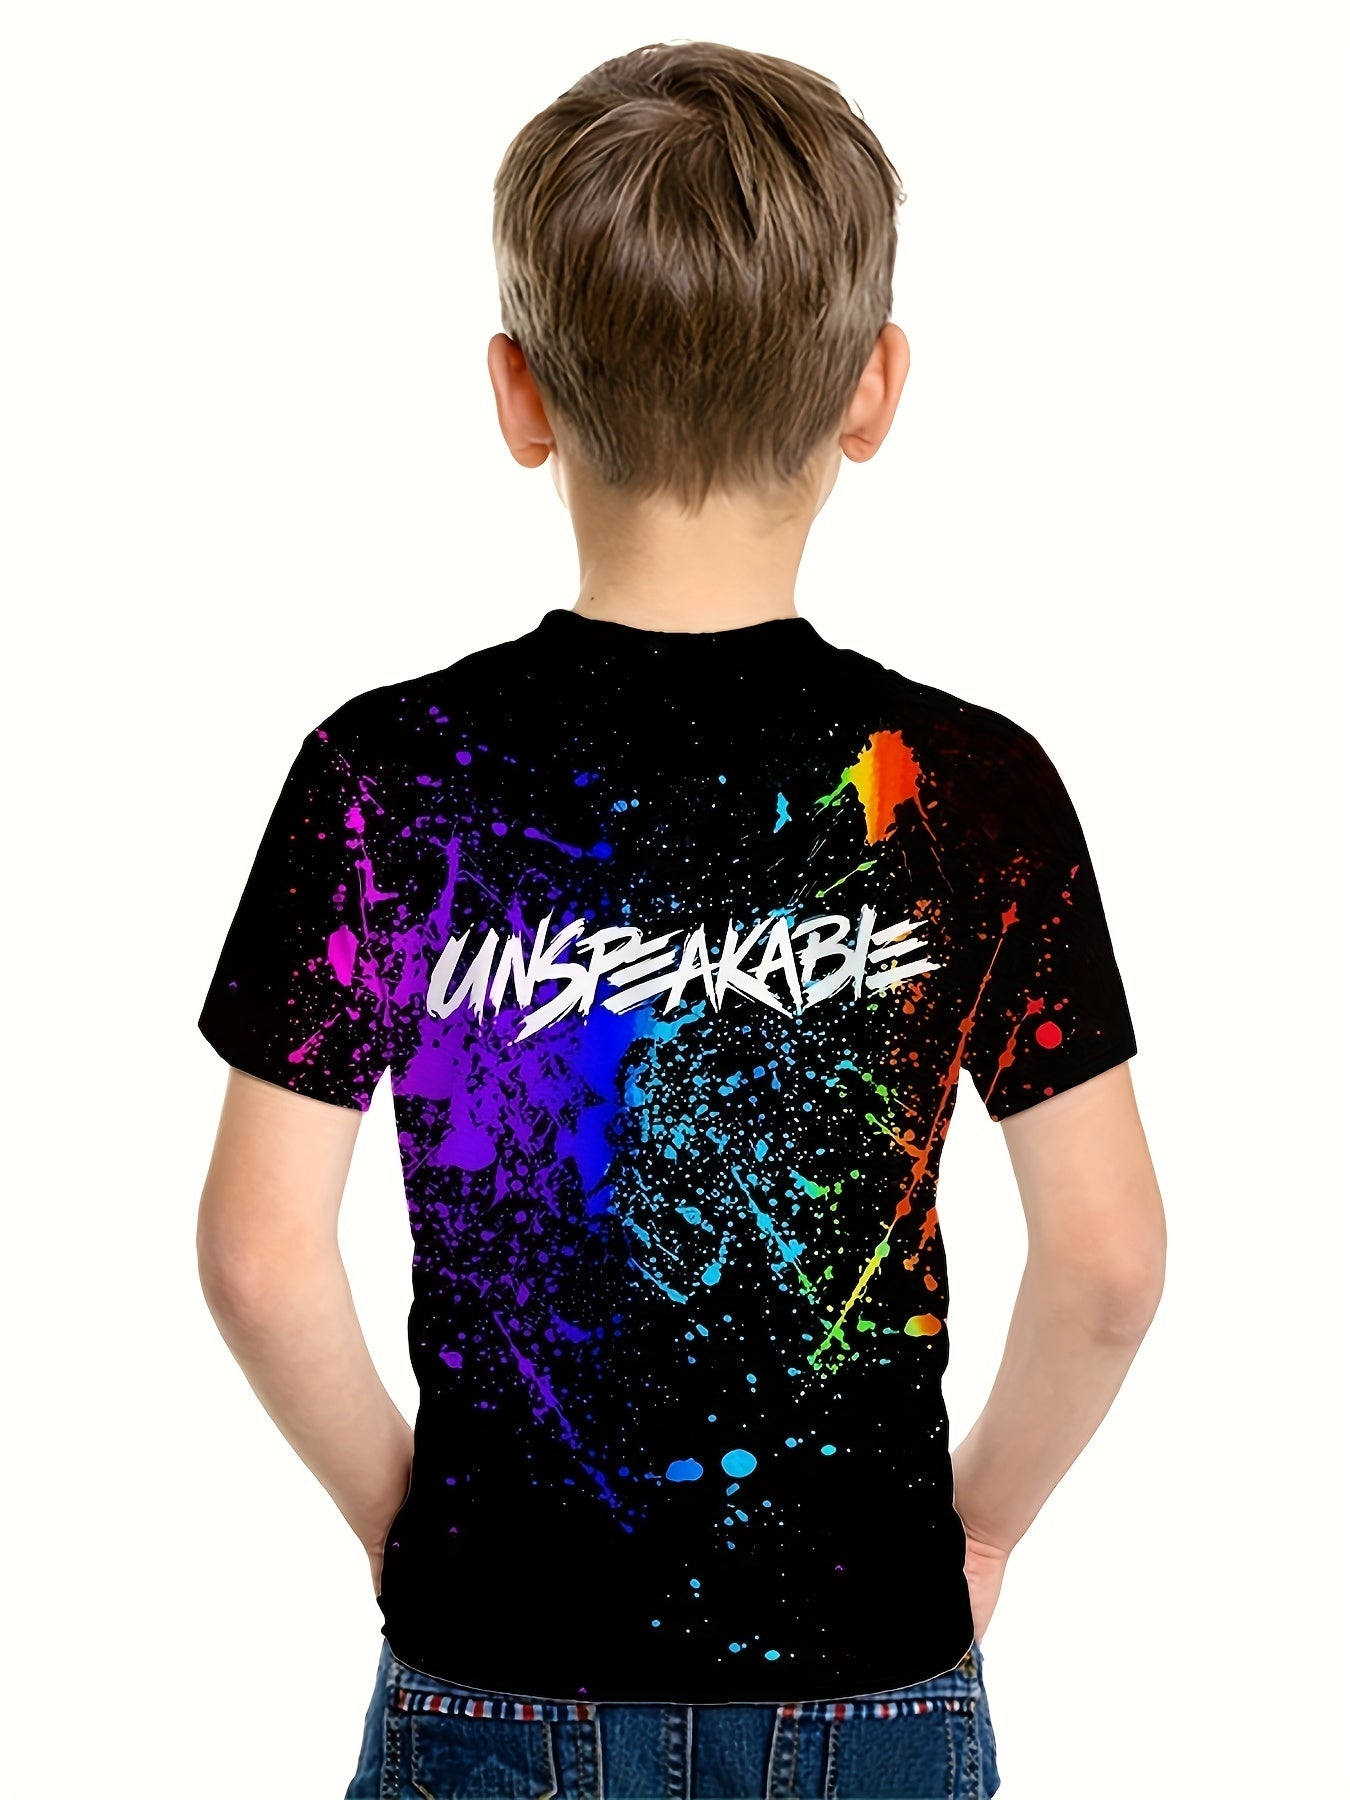 UNSPEAKABLE Print T-shirt For Cool Kids! Casual Short Sleeve Top, Unisex Tee, Girl's & Boy's Clothes For Summer